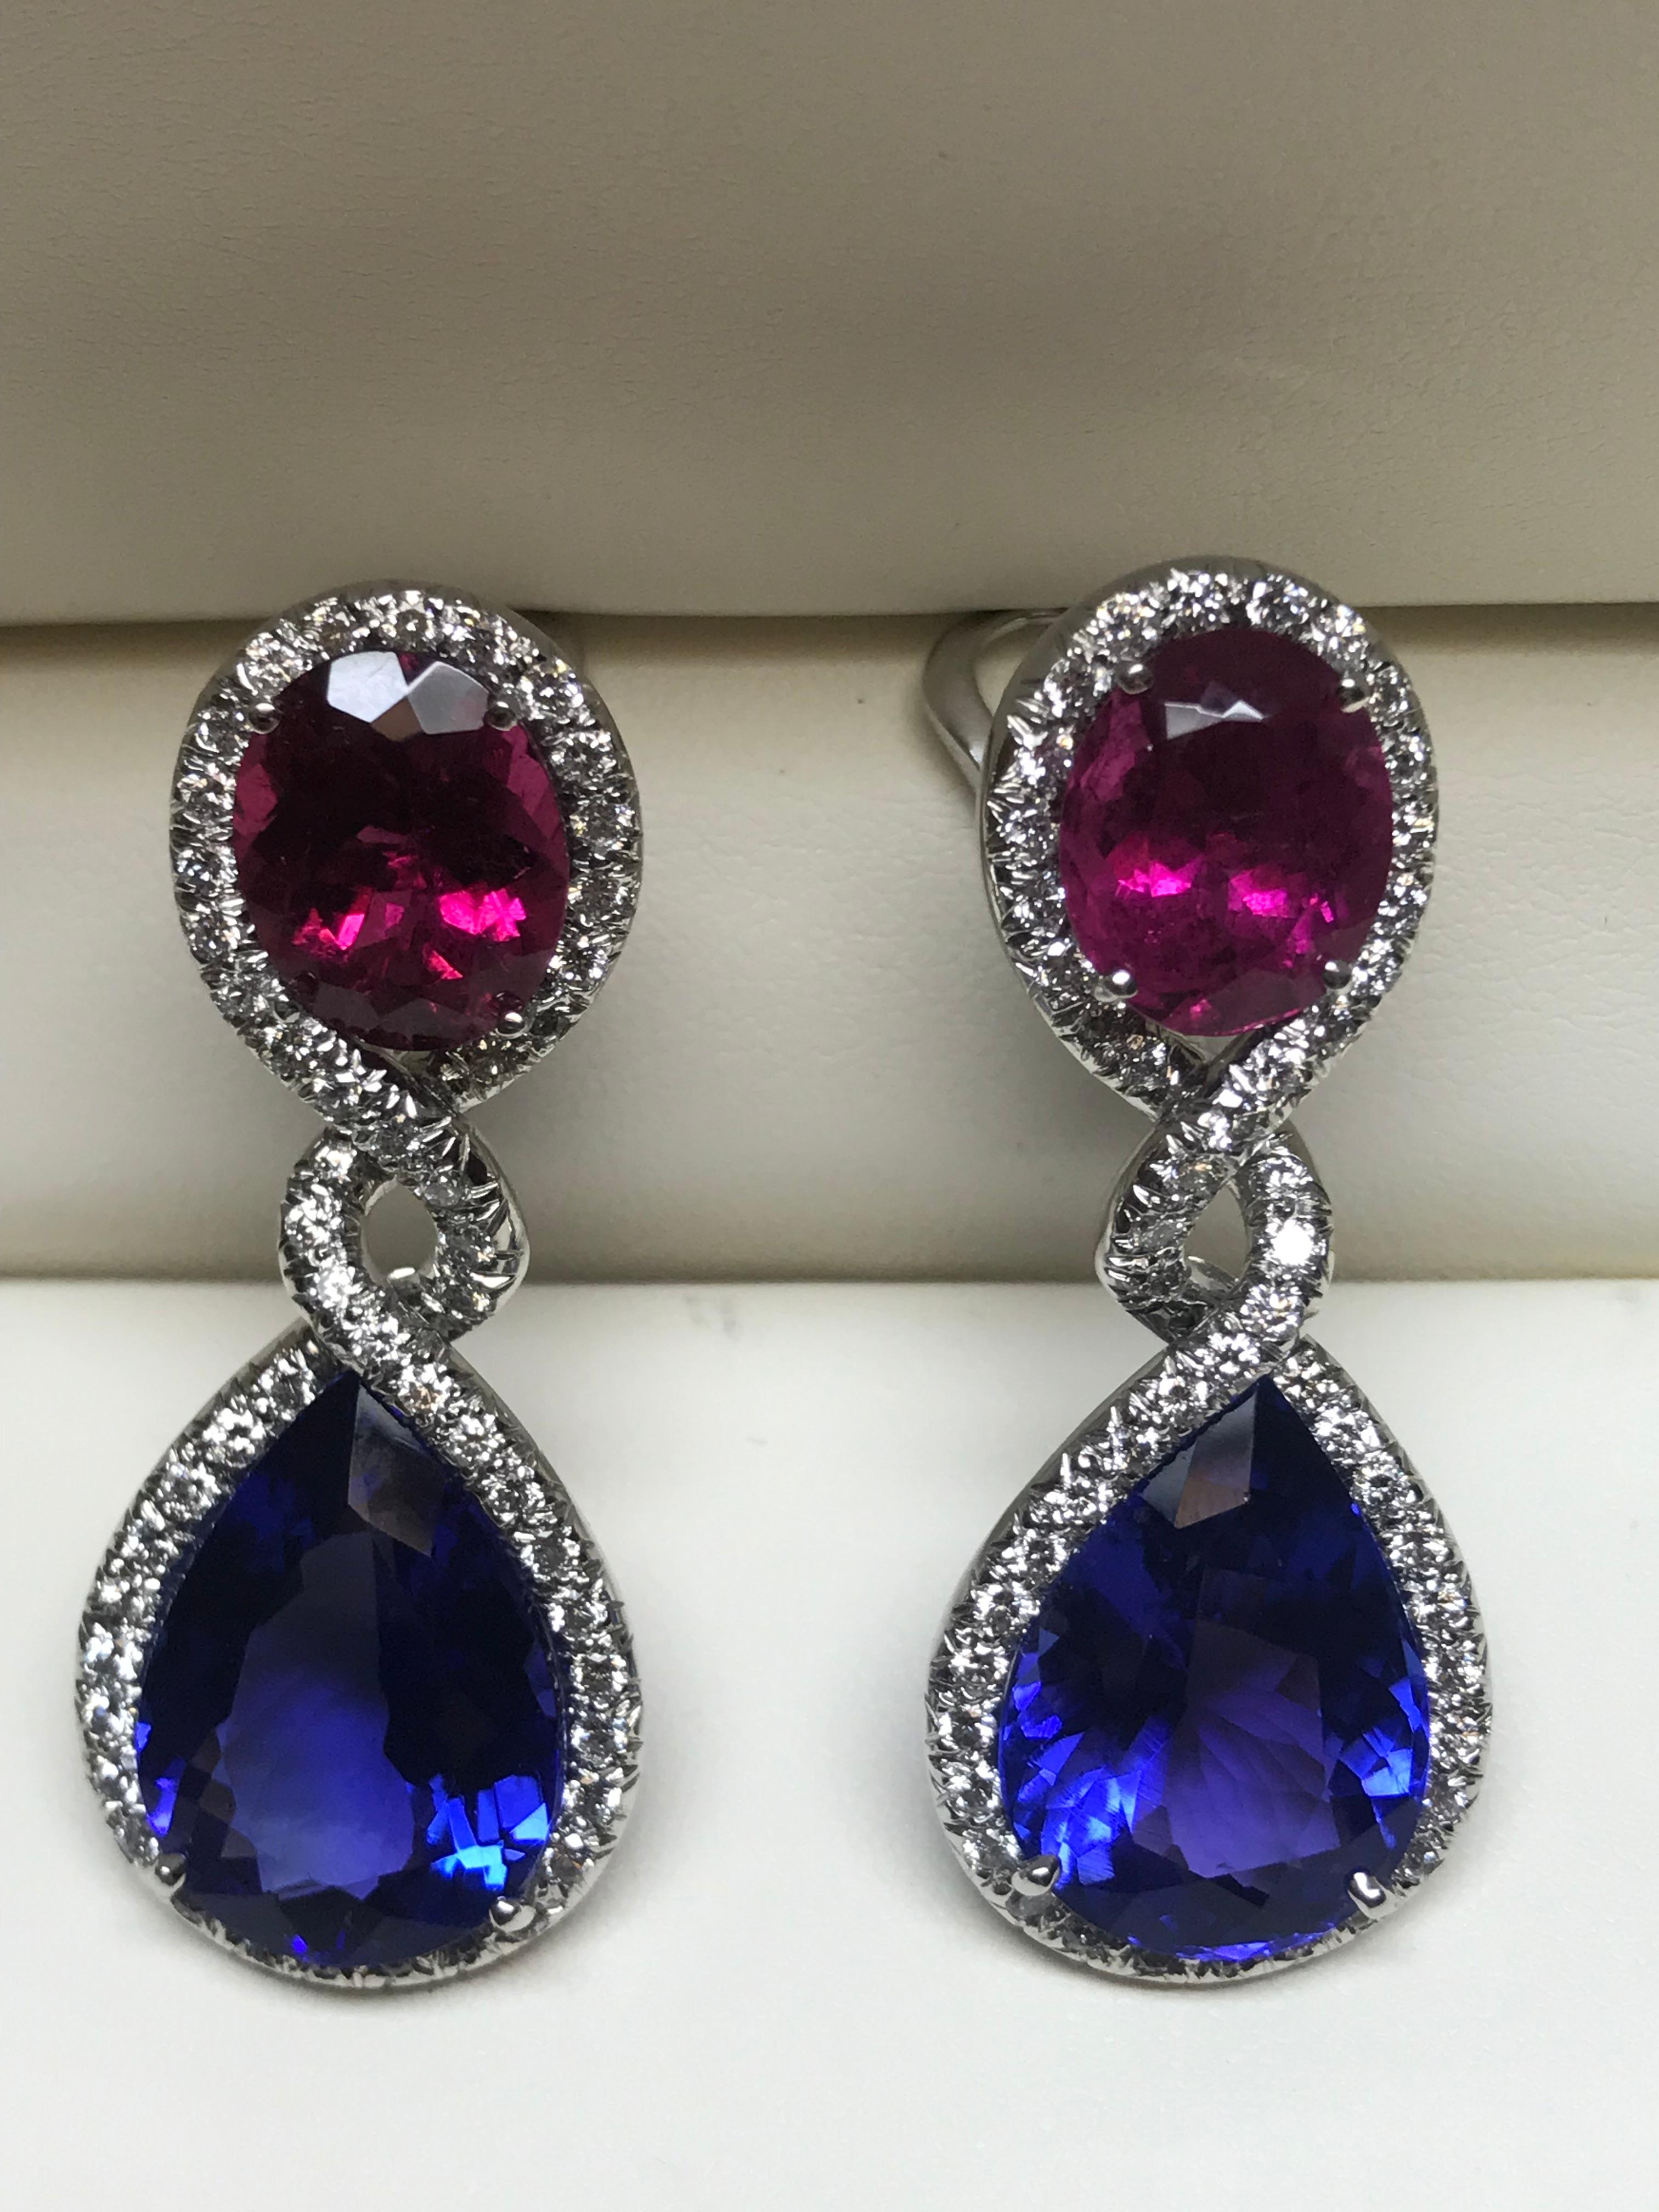 A MUST for any true GEM lover. These absolutely one off stunning earrings consist of 25.52 carats of perfectly matched gem quality Tanzanites and same quality 9.70 carats of Rubellites. Highlighting these incredible stones are 2.30 carats of G+